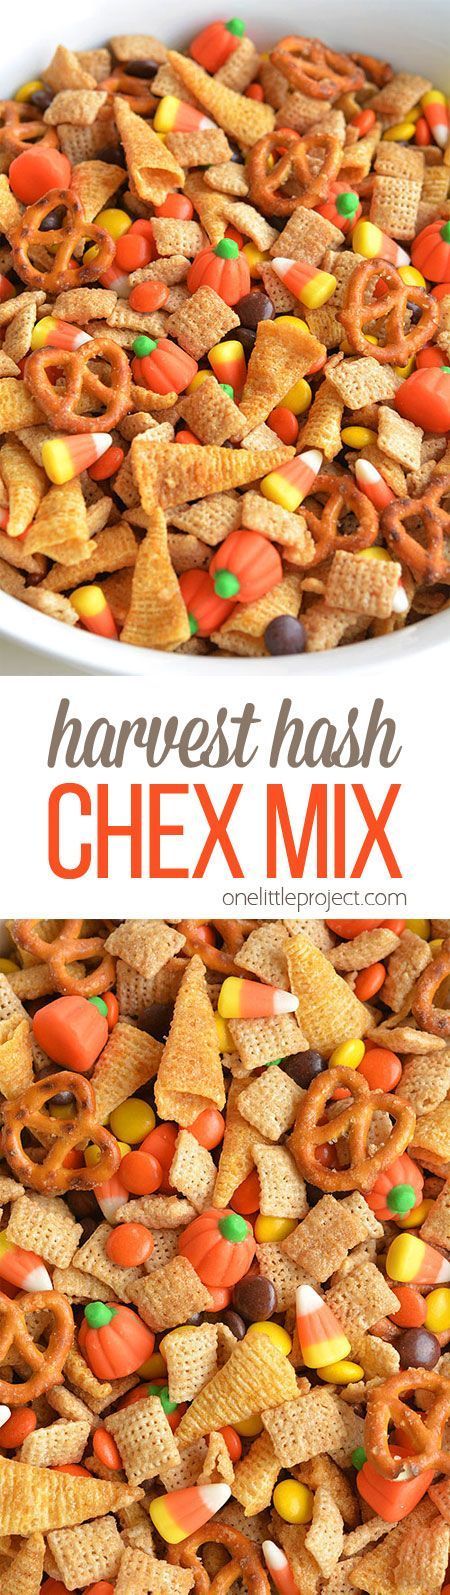 This Halloween harvest hash Chex mix is the PERFECT combination of sweet and salty. It tastes soooo good!! It would be awesome for